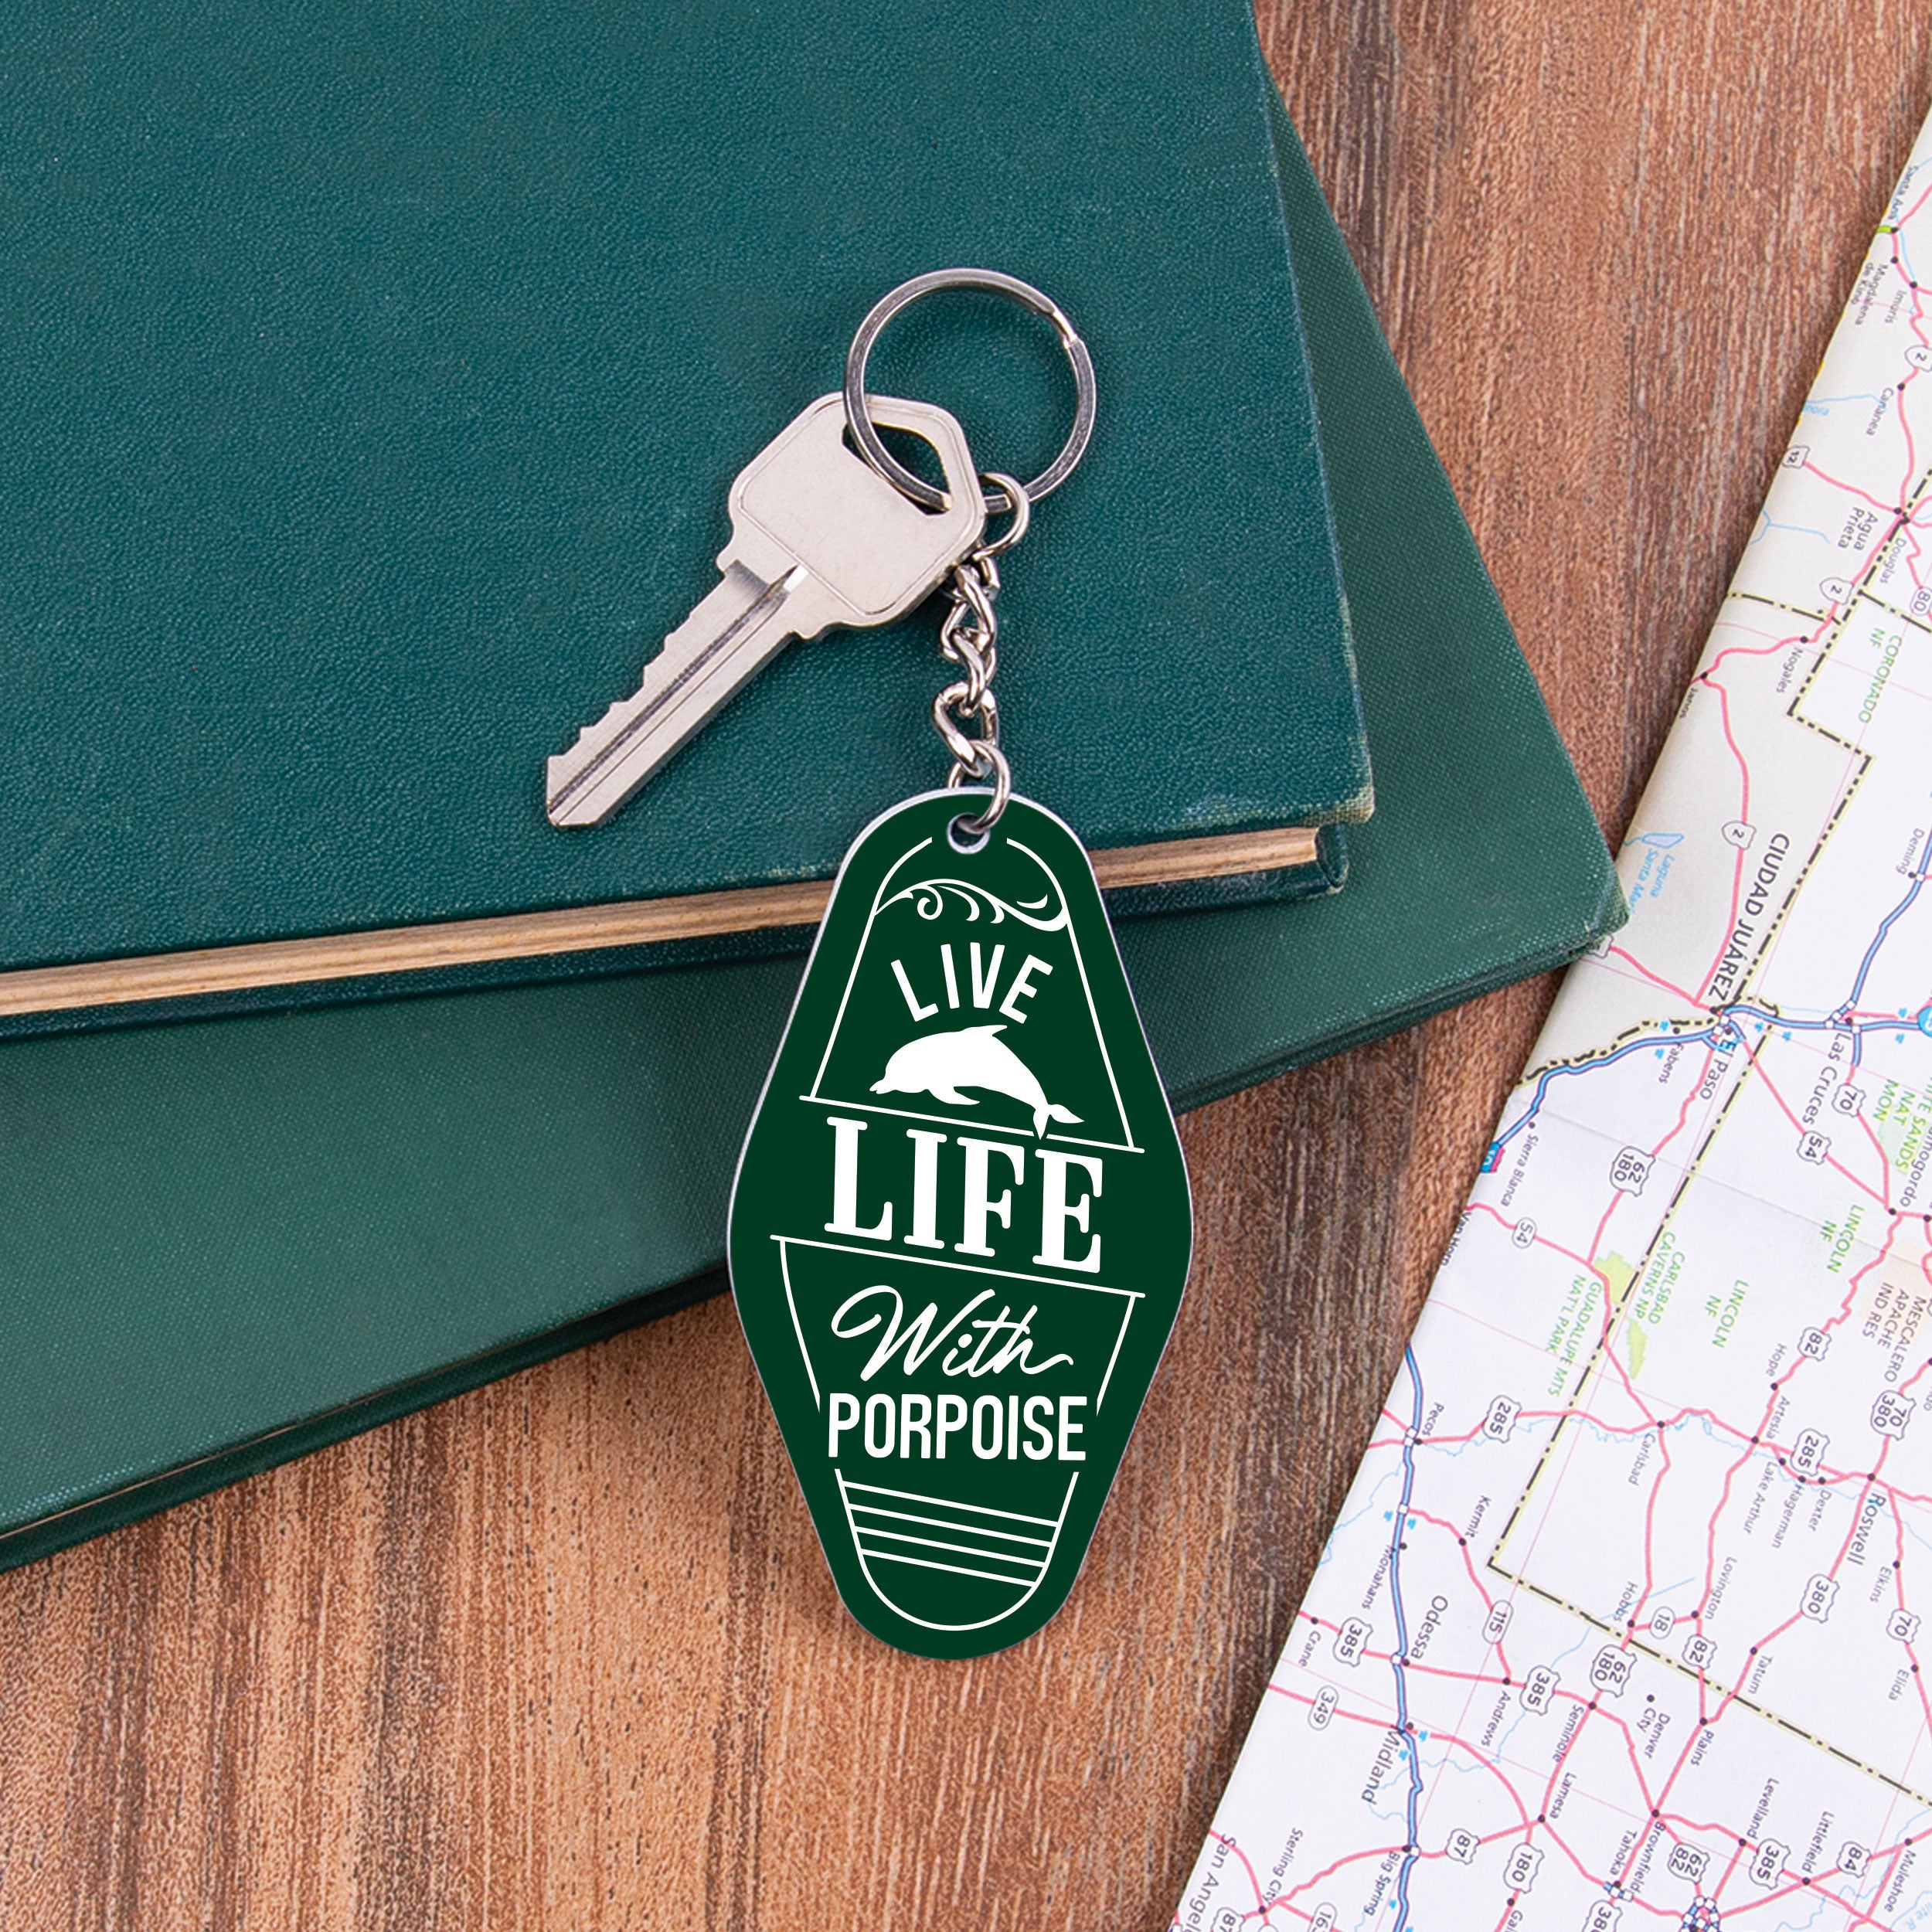 Live Life With Porpoise Vintage Engraved Key Chain